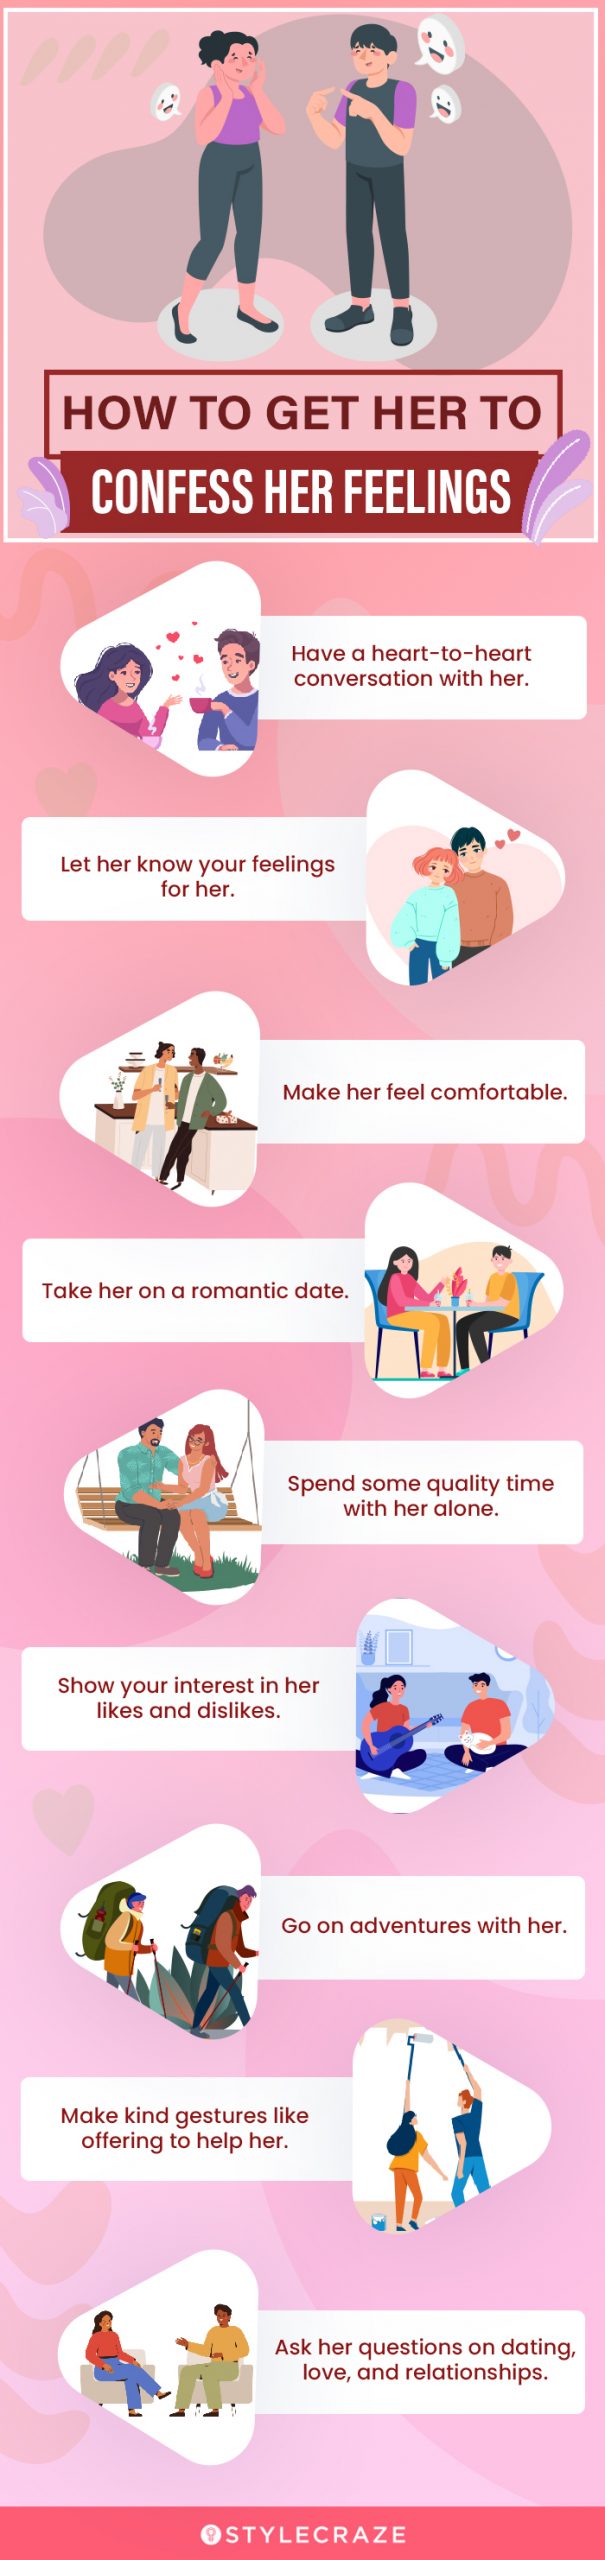 how to get her to confess her feelings (infographic)